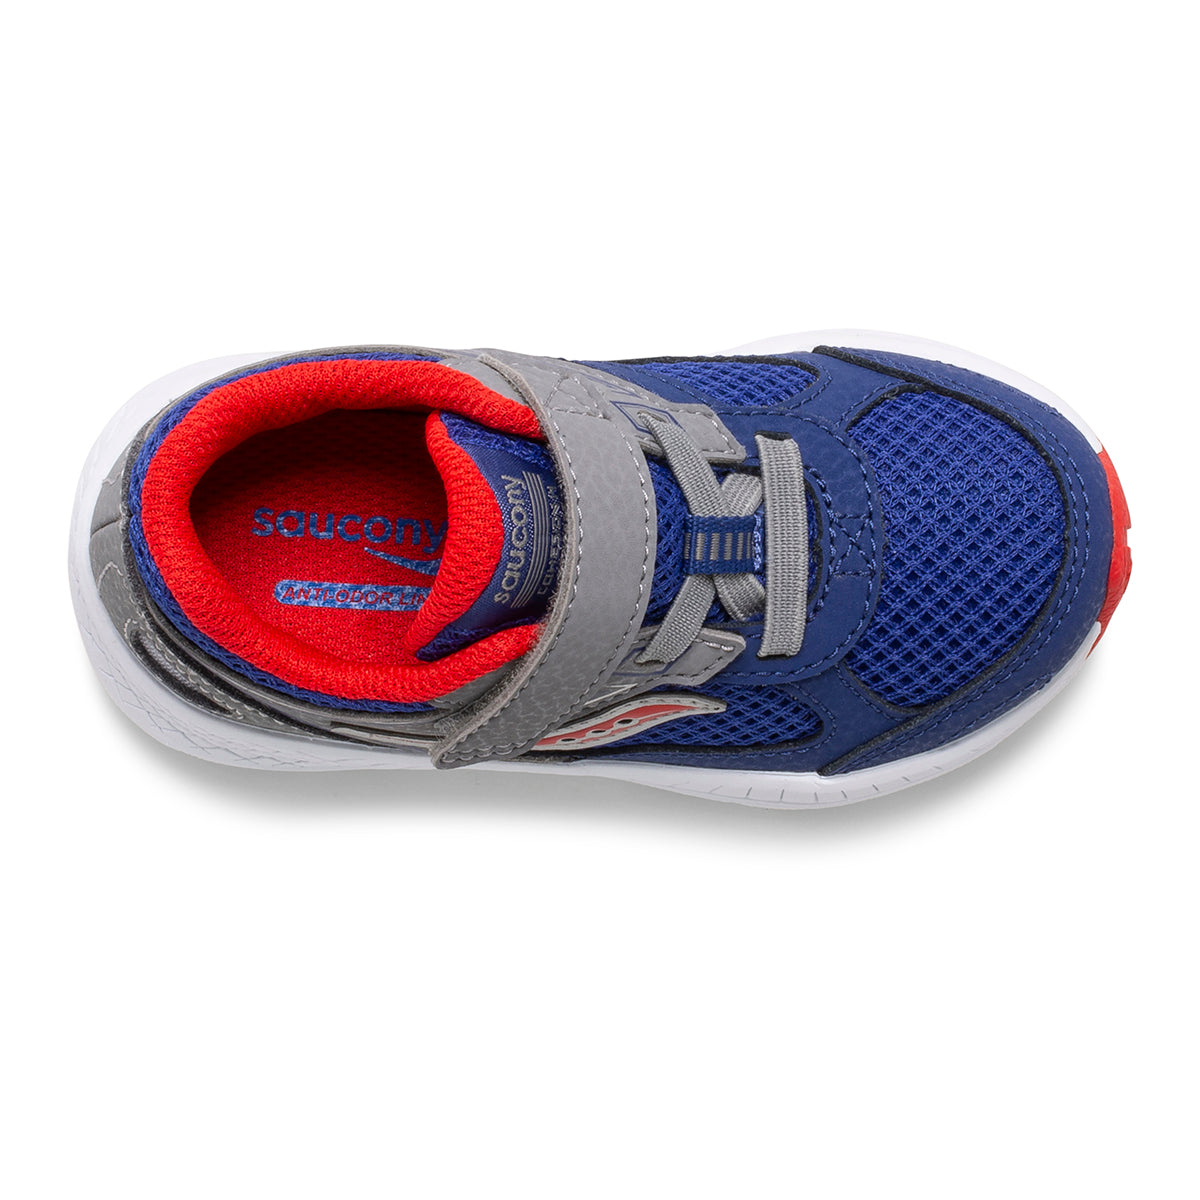 cohesion-14-ac-jr-sneaker-littlekid-navy-red__Navy/Red_5